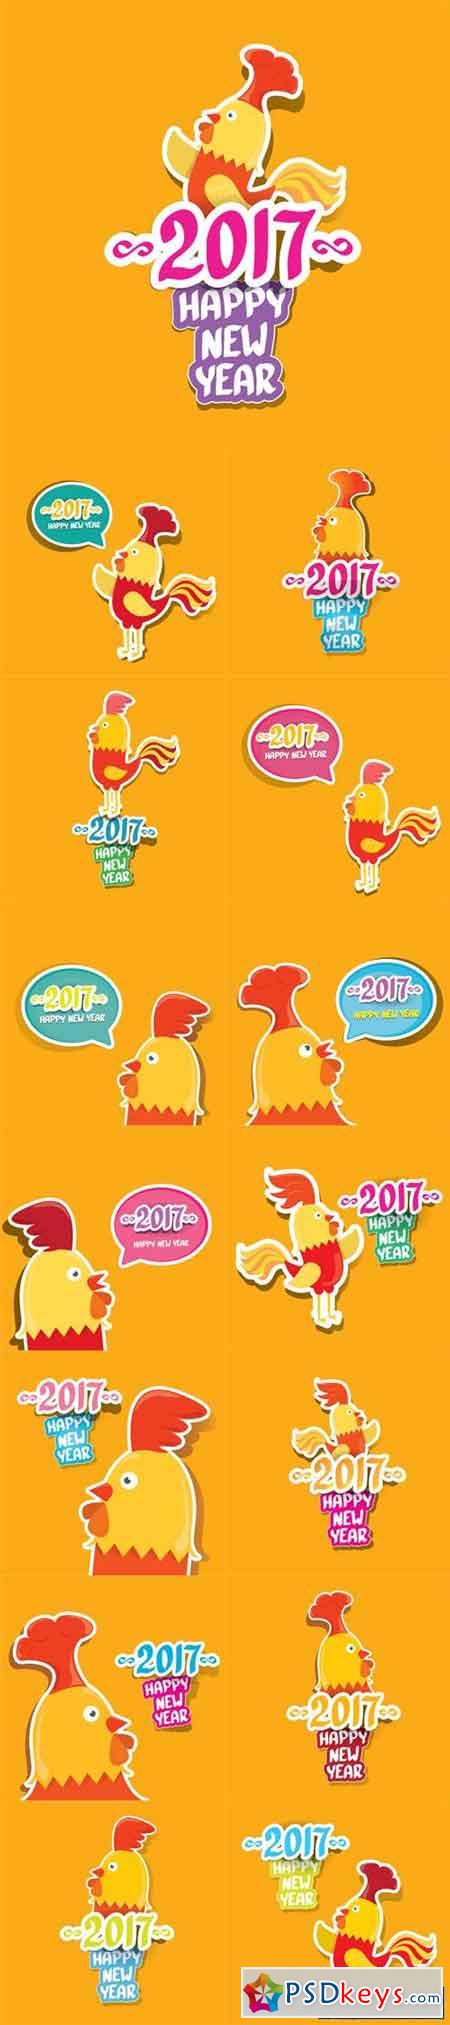 New Year 2017 with Cartoon Funny Rooster 2